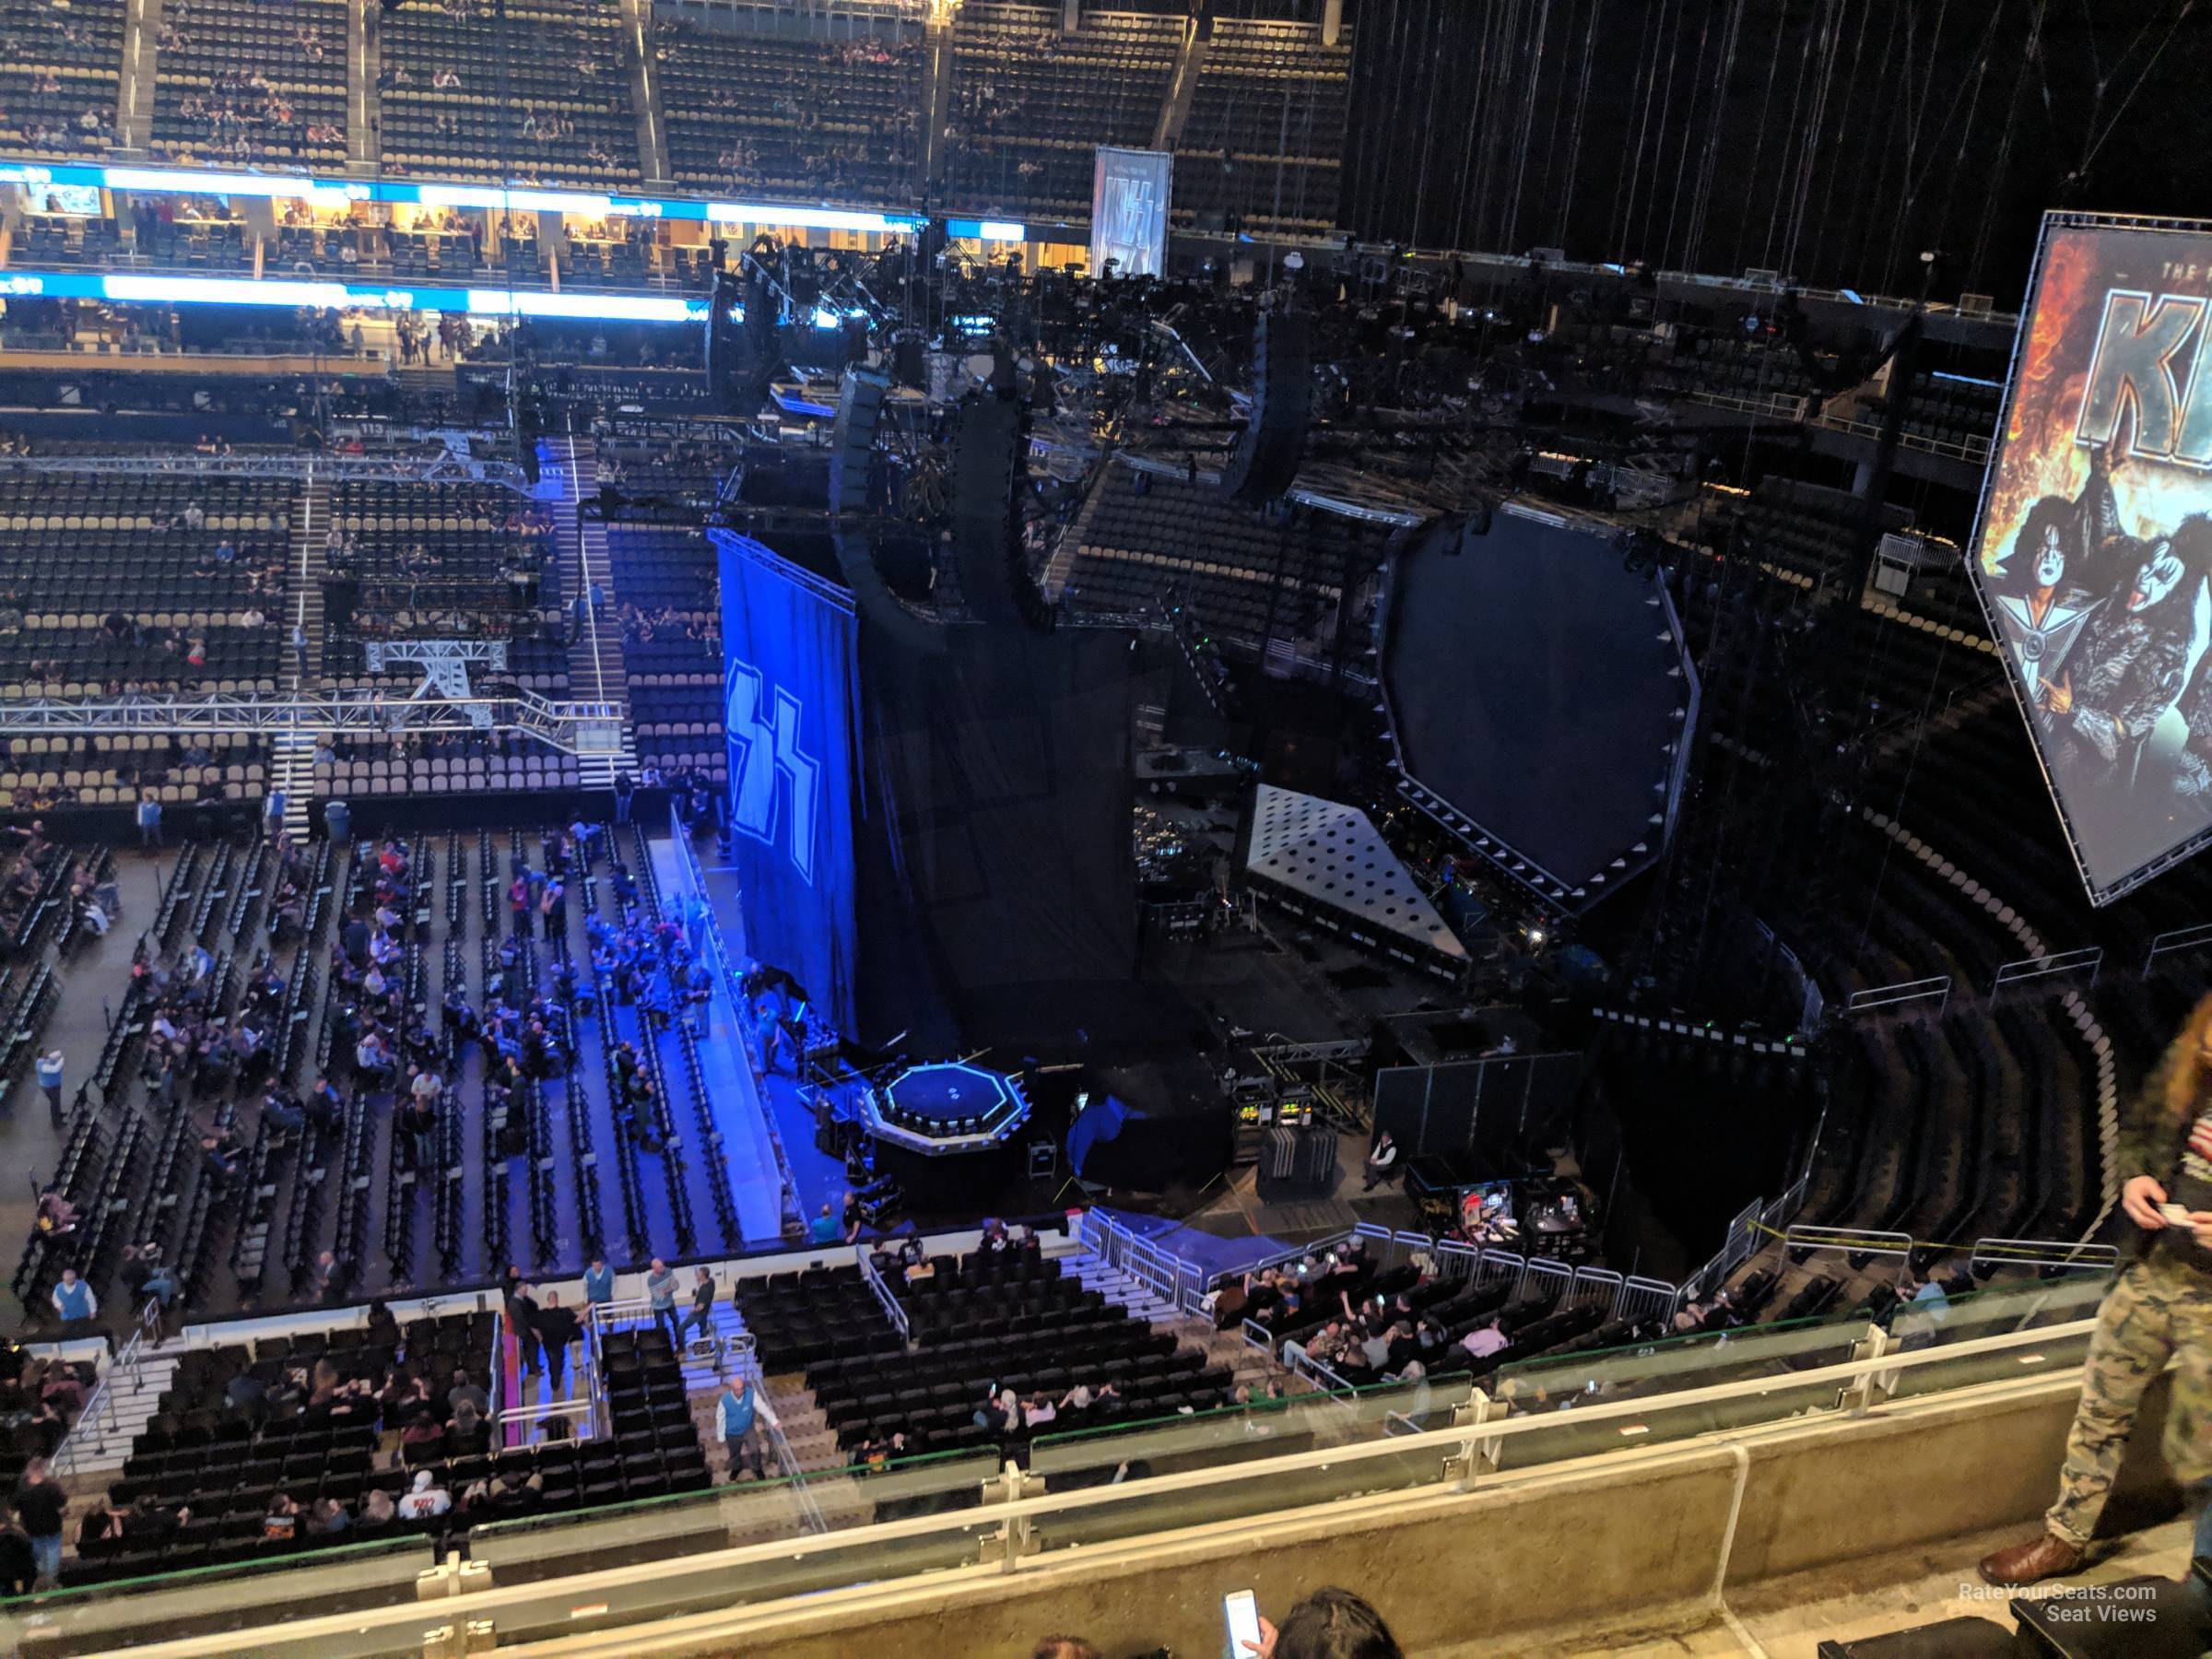 section 201, row c seat view  for concert - ppg paints arena